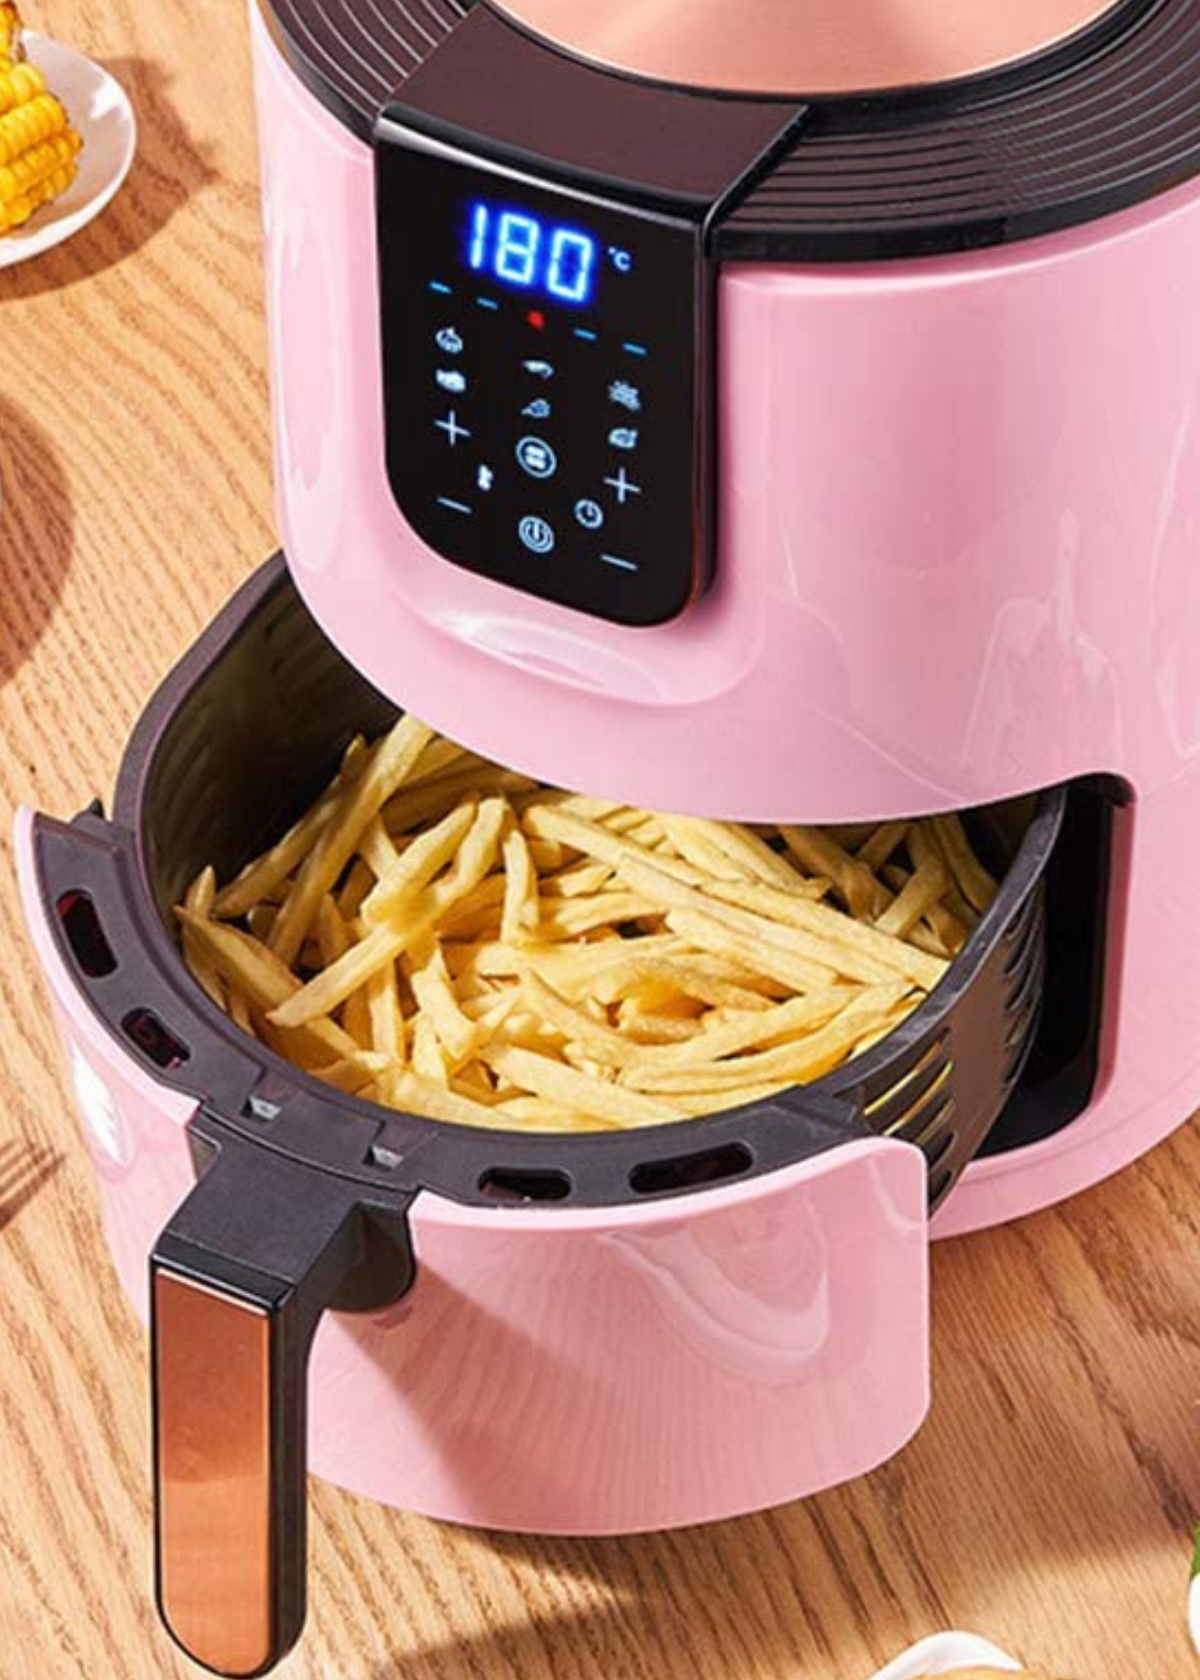 5 Picks Of The Best Pink Air Fryer: A Choice For Pink Color Lovers